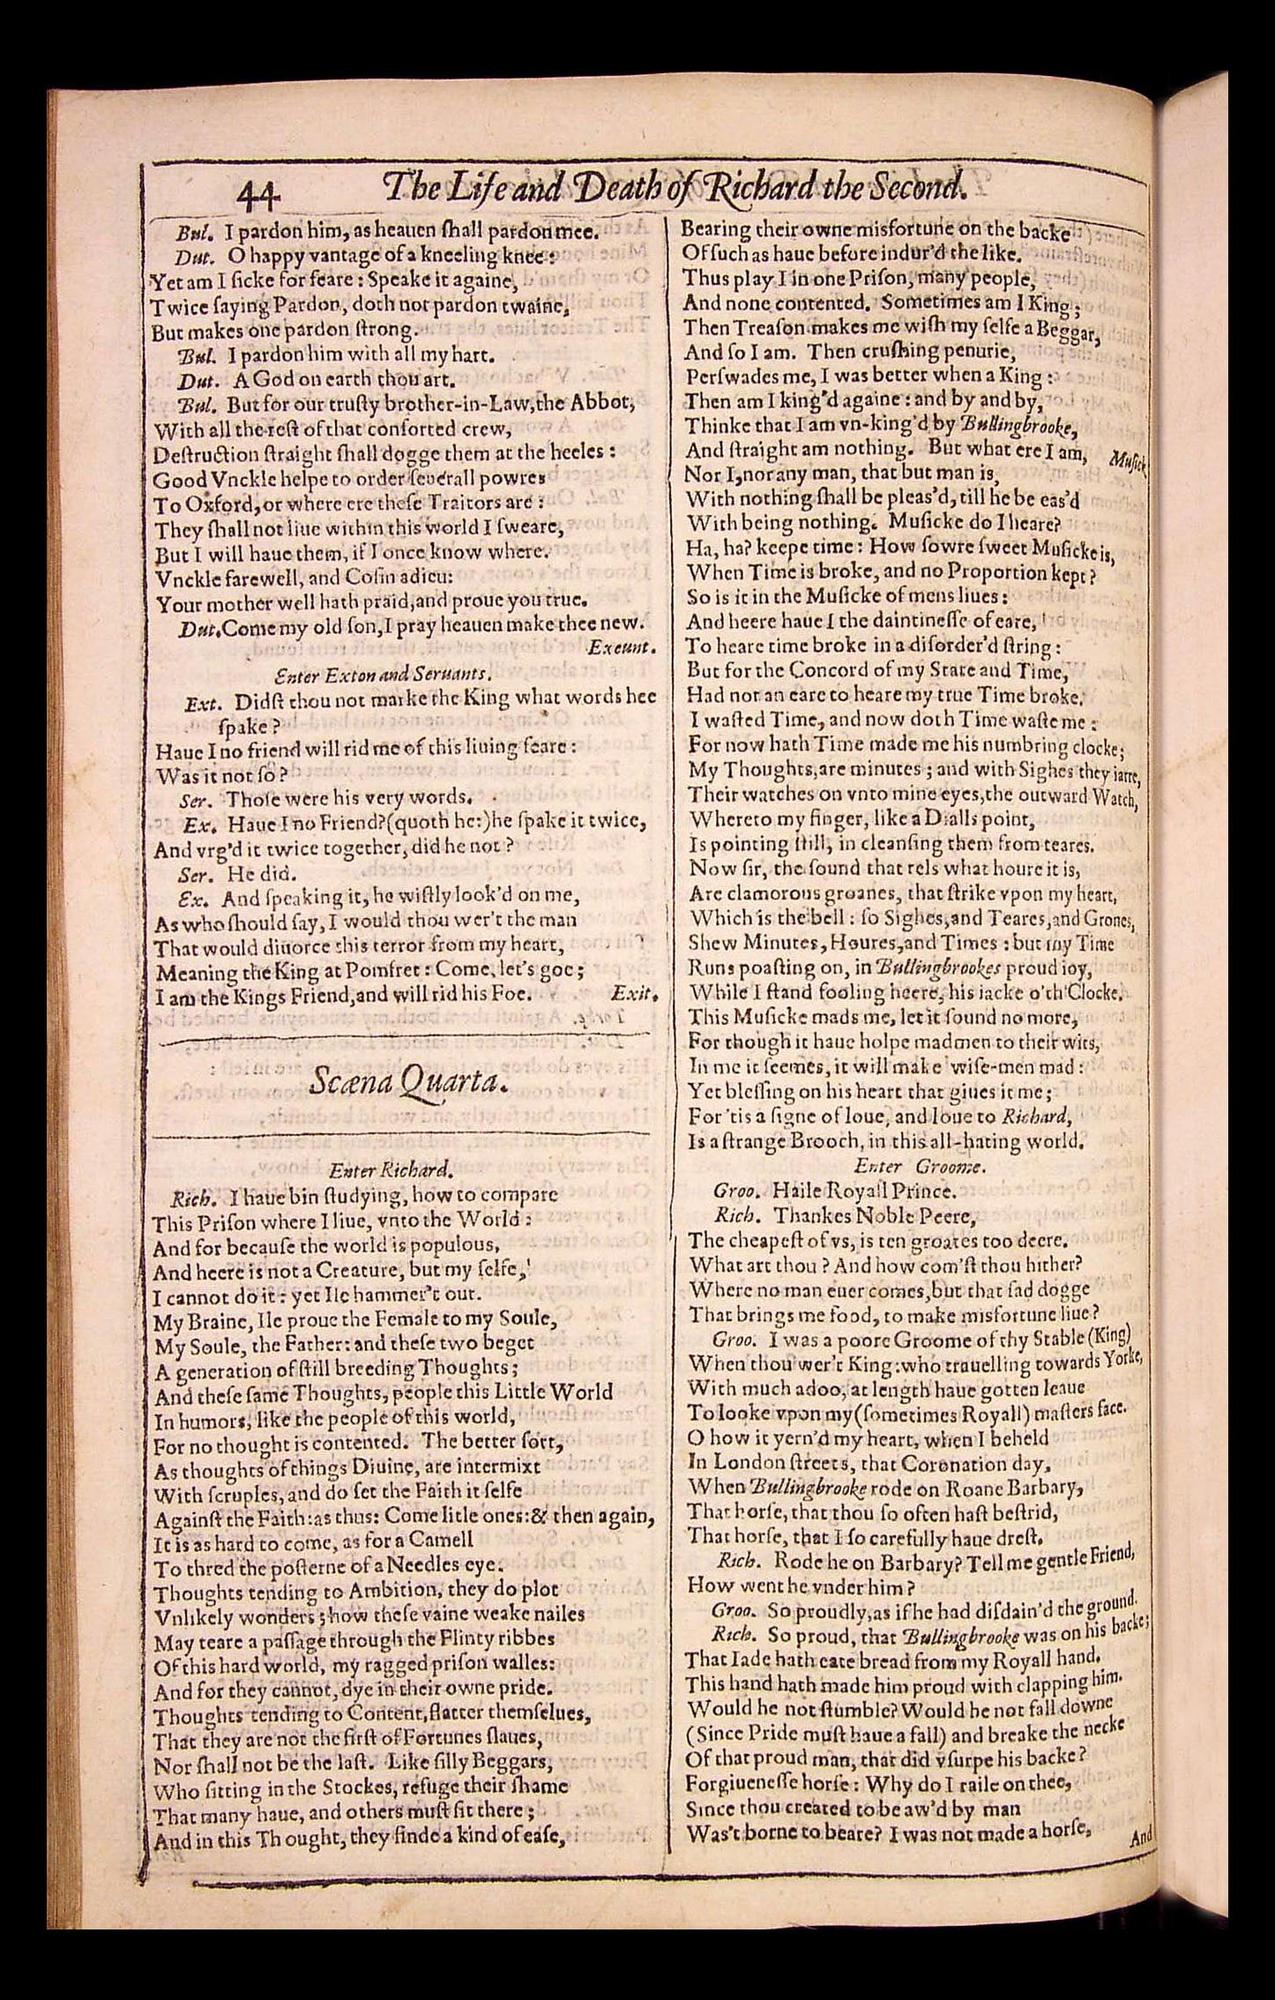 Image of page 366